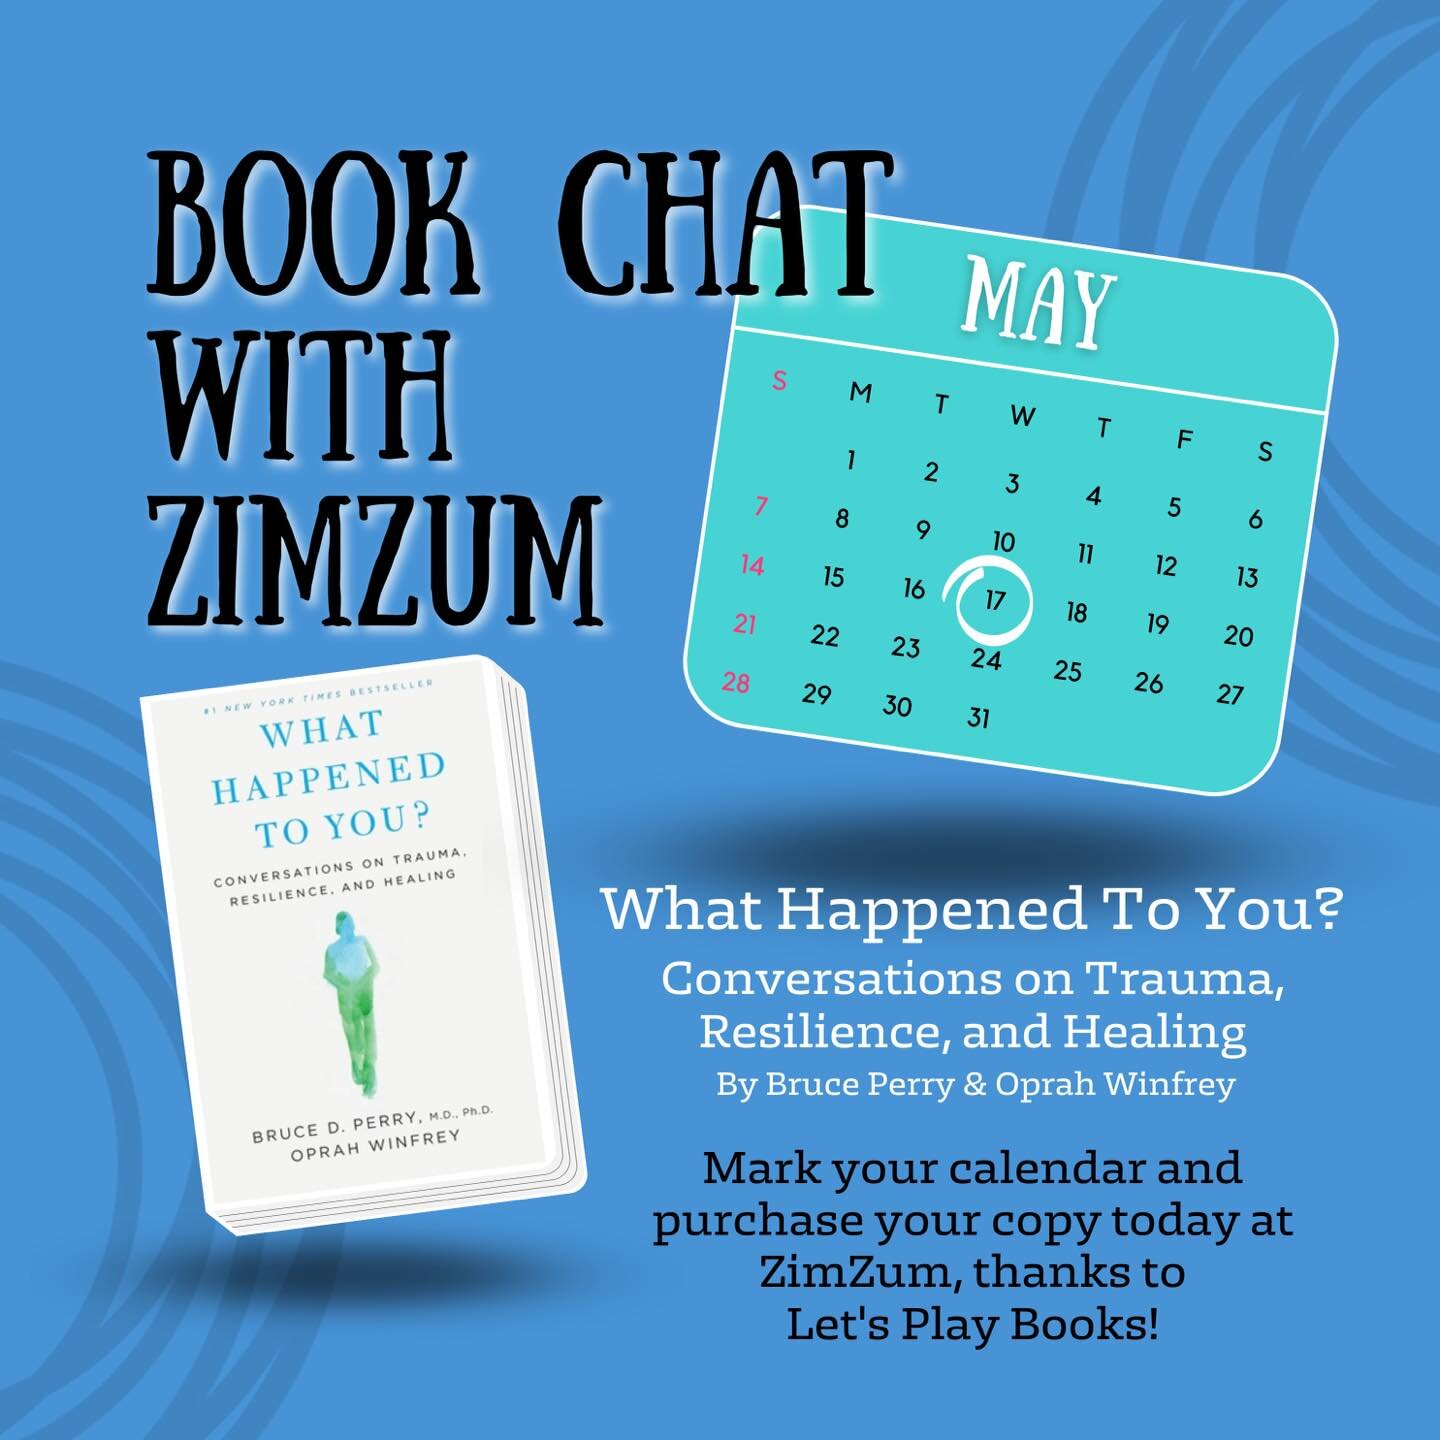 You're invited to a ZimZum Book Chat! 
📚
On May 17th we'll be hosting an on-site book chat at 20 E. 4th Street Emmaus, where we will highlight the book &quot;What Happened To You? - Conversations on trauma, resilience, and healing.&quot; With a few 